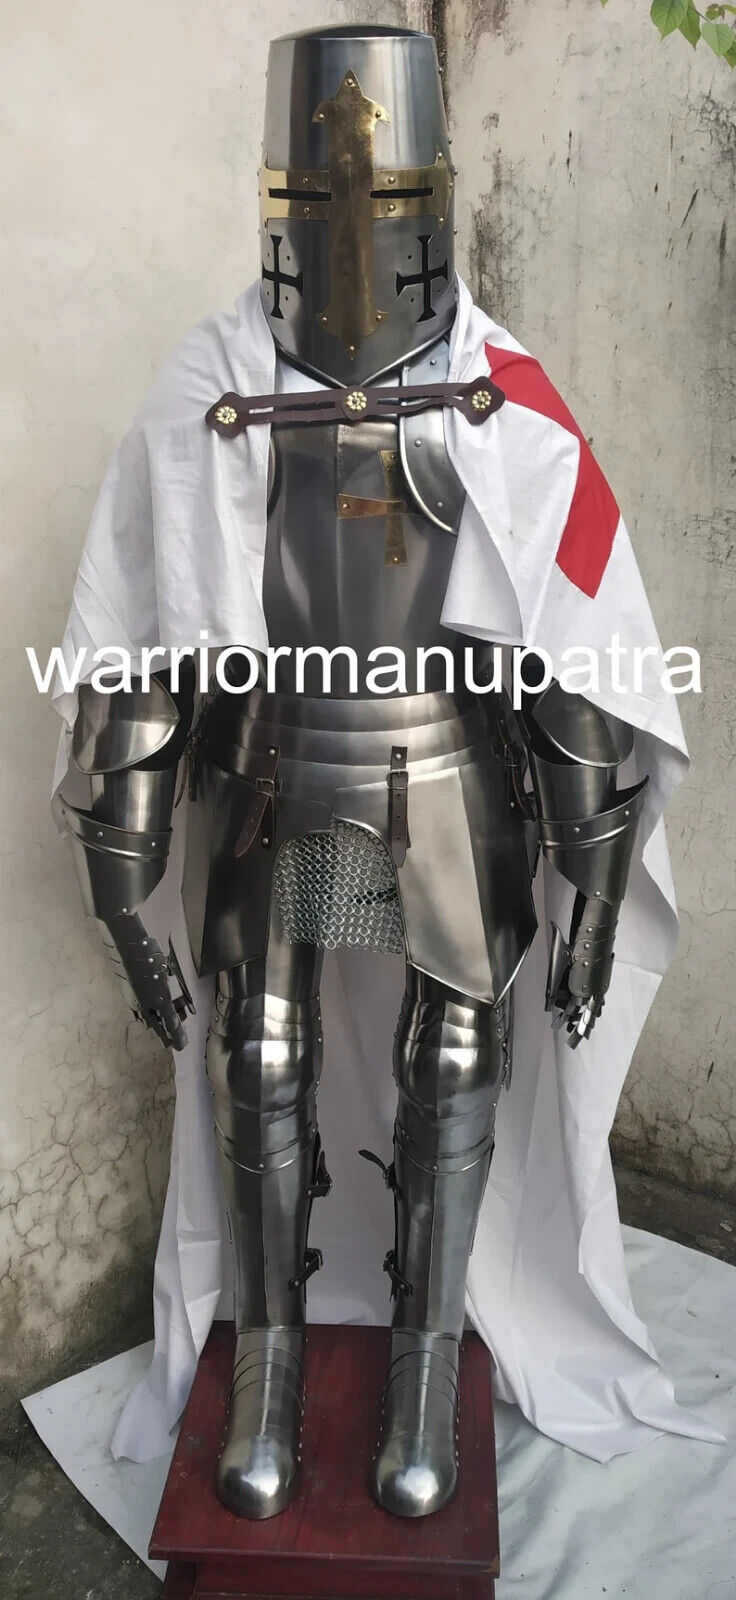 Medieval Wearble Armour Knight Wearable Suit Of Armor Crusader Combat Full Body